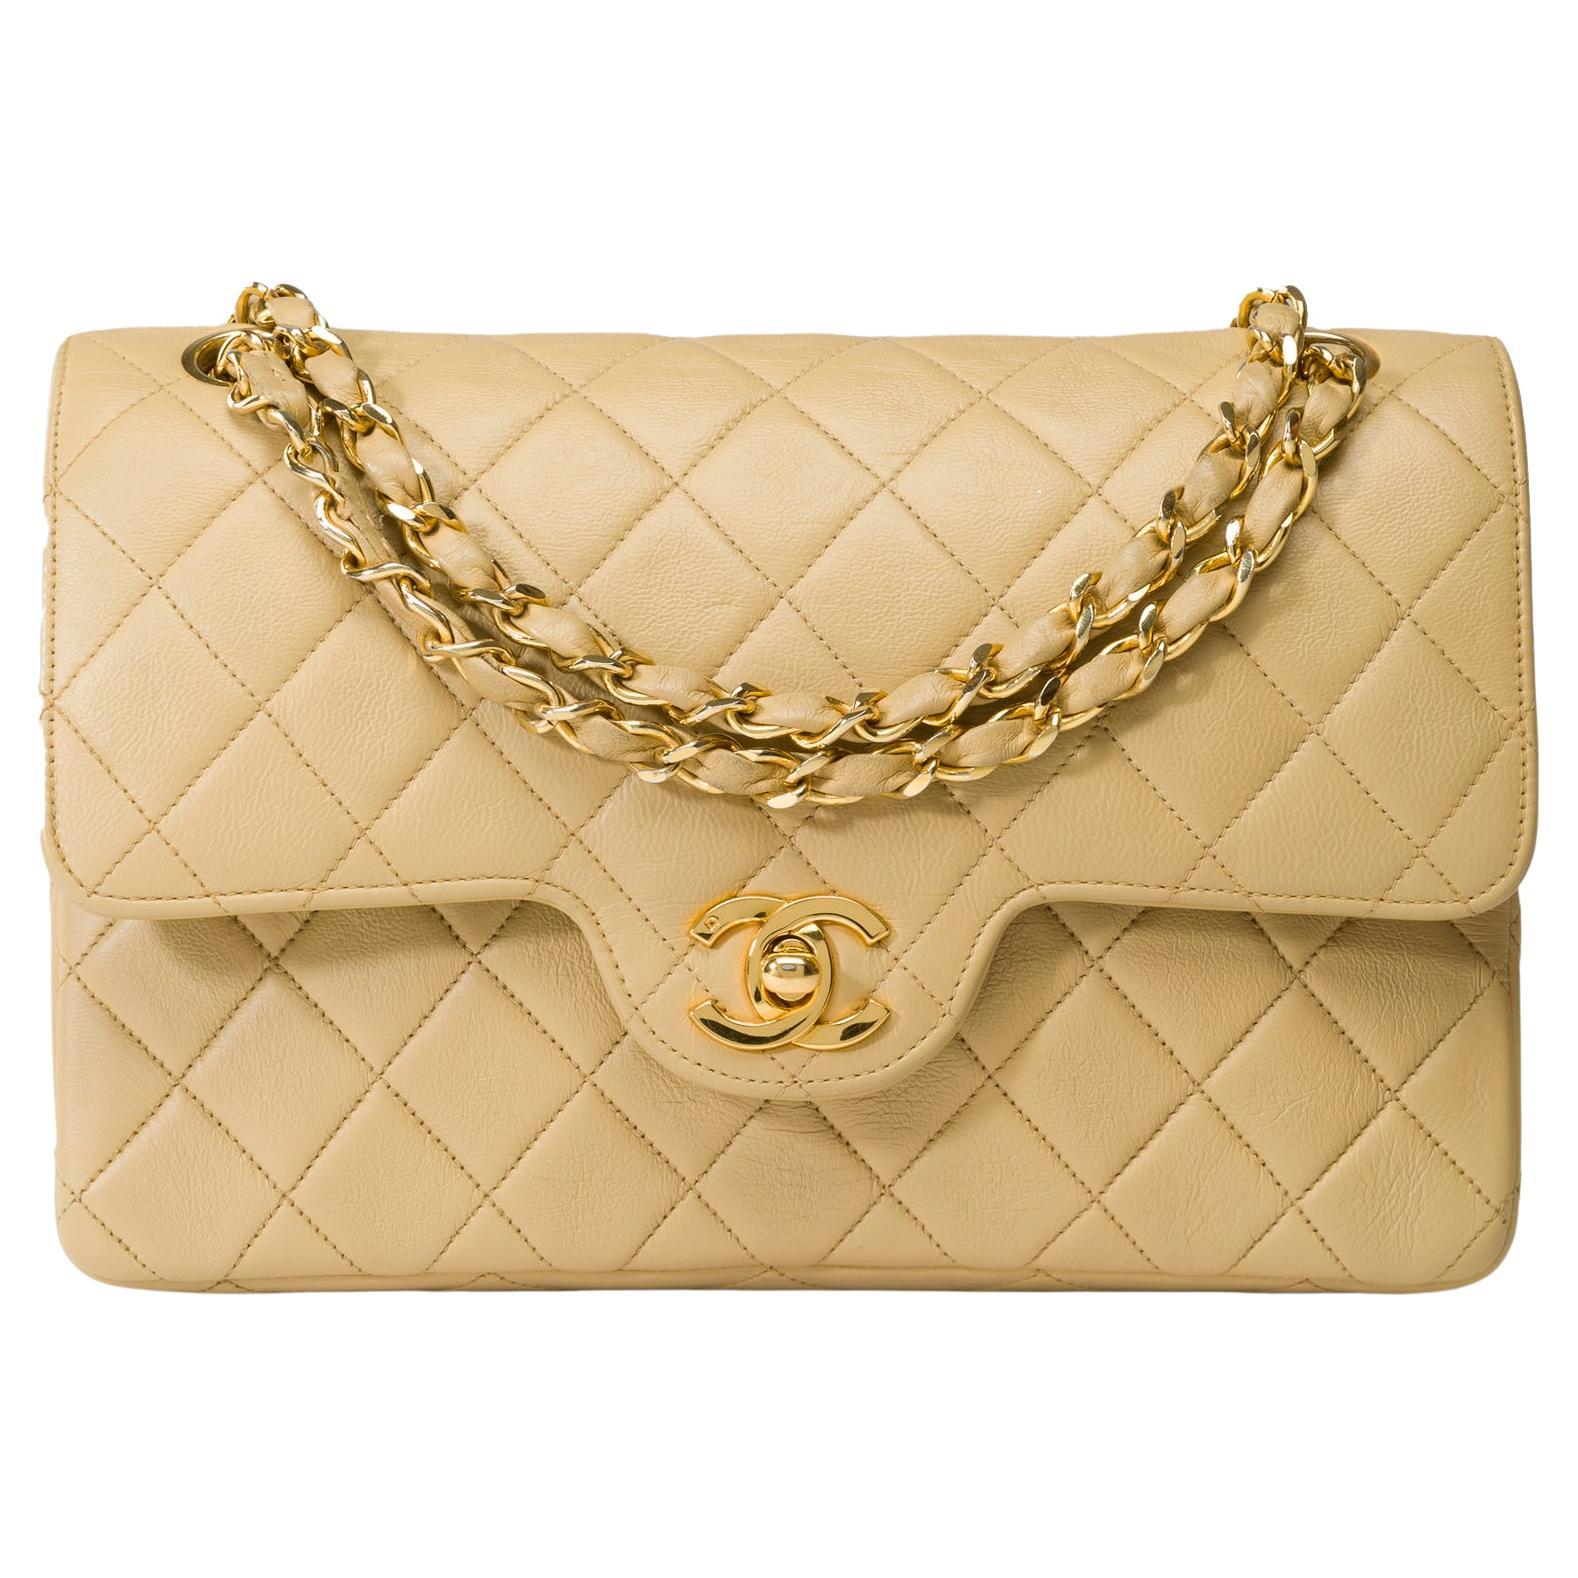 Chanel Timeless 23cm double flap shoulder bag in beige quilted lambskin, GHW For Sale